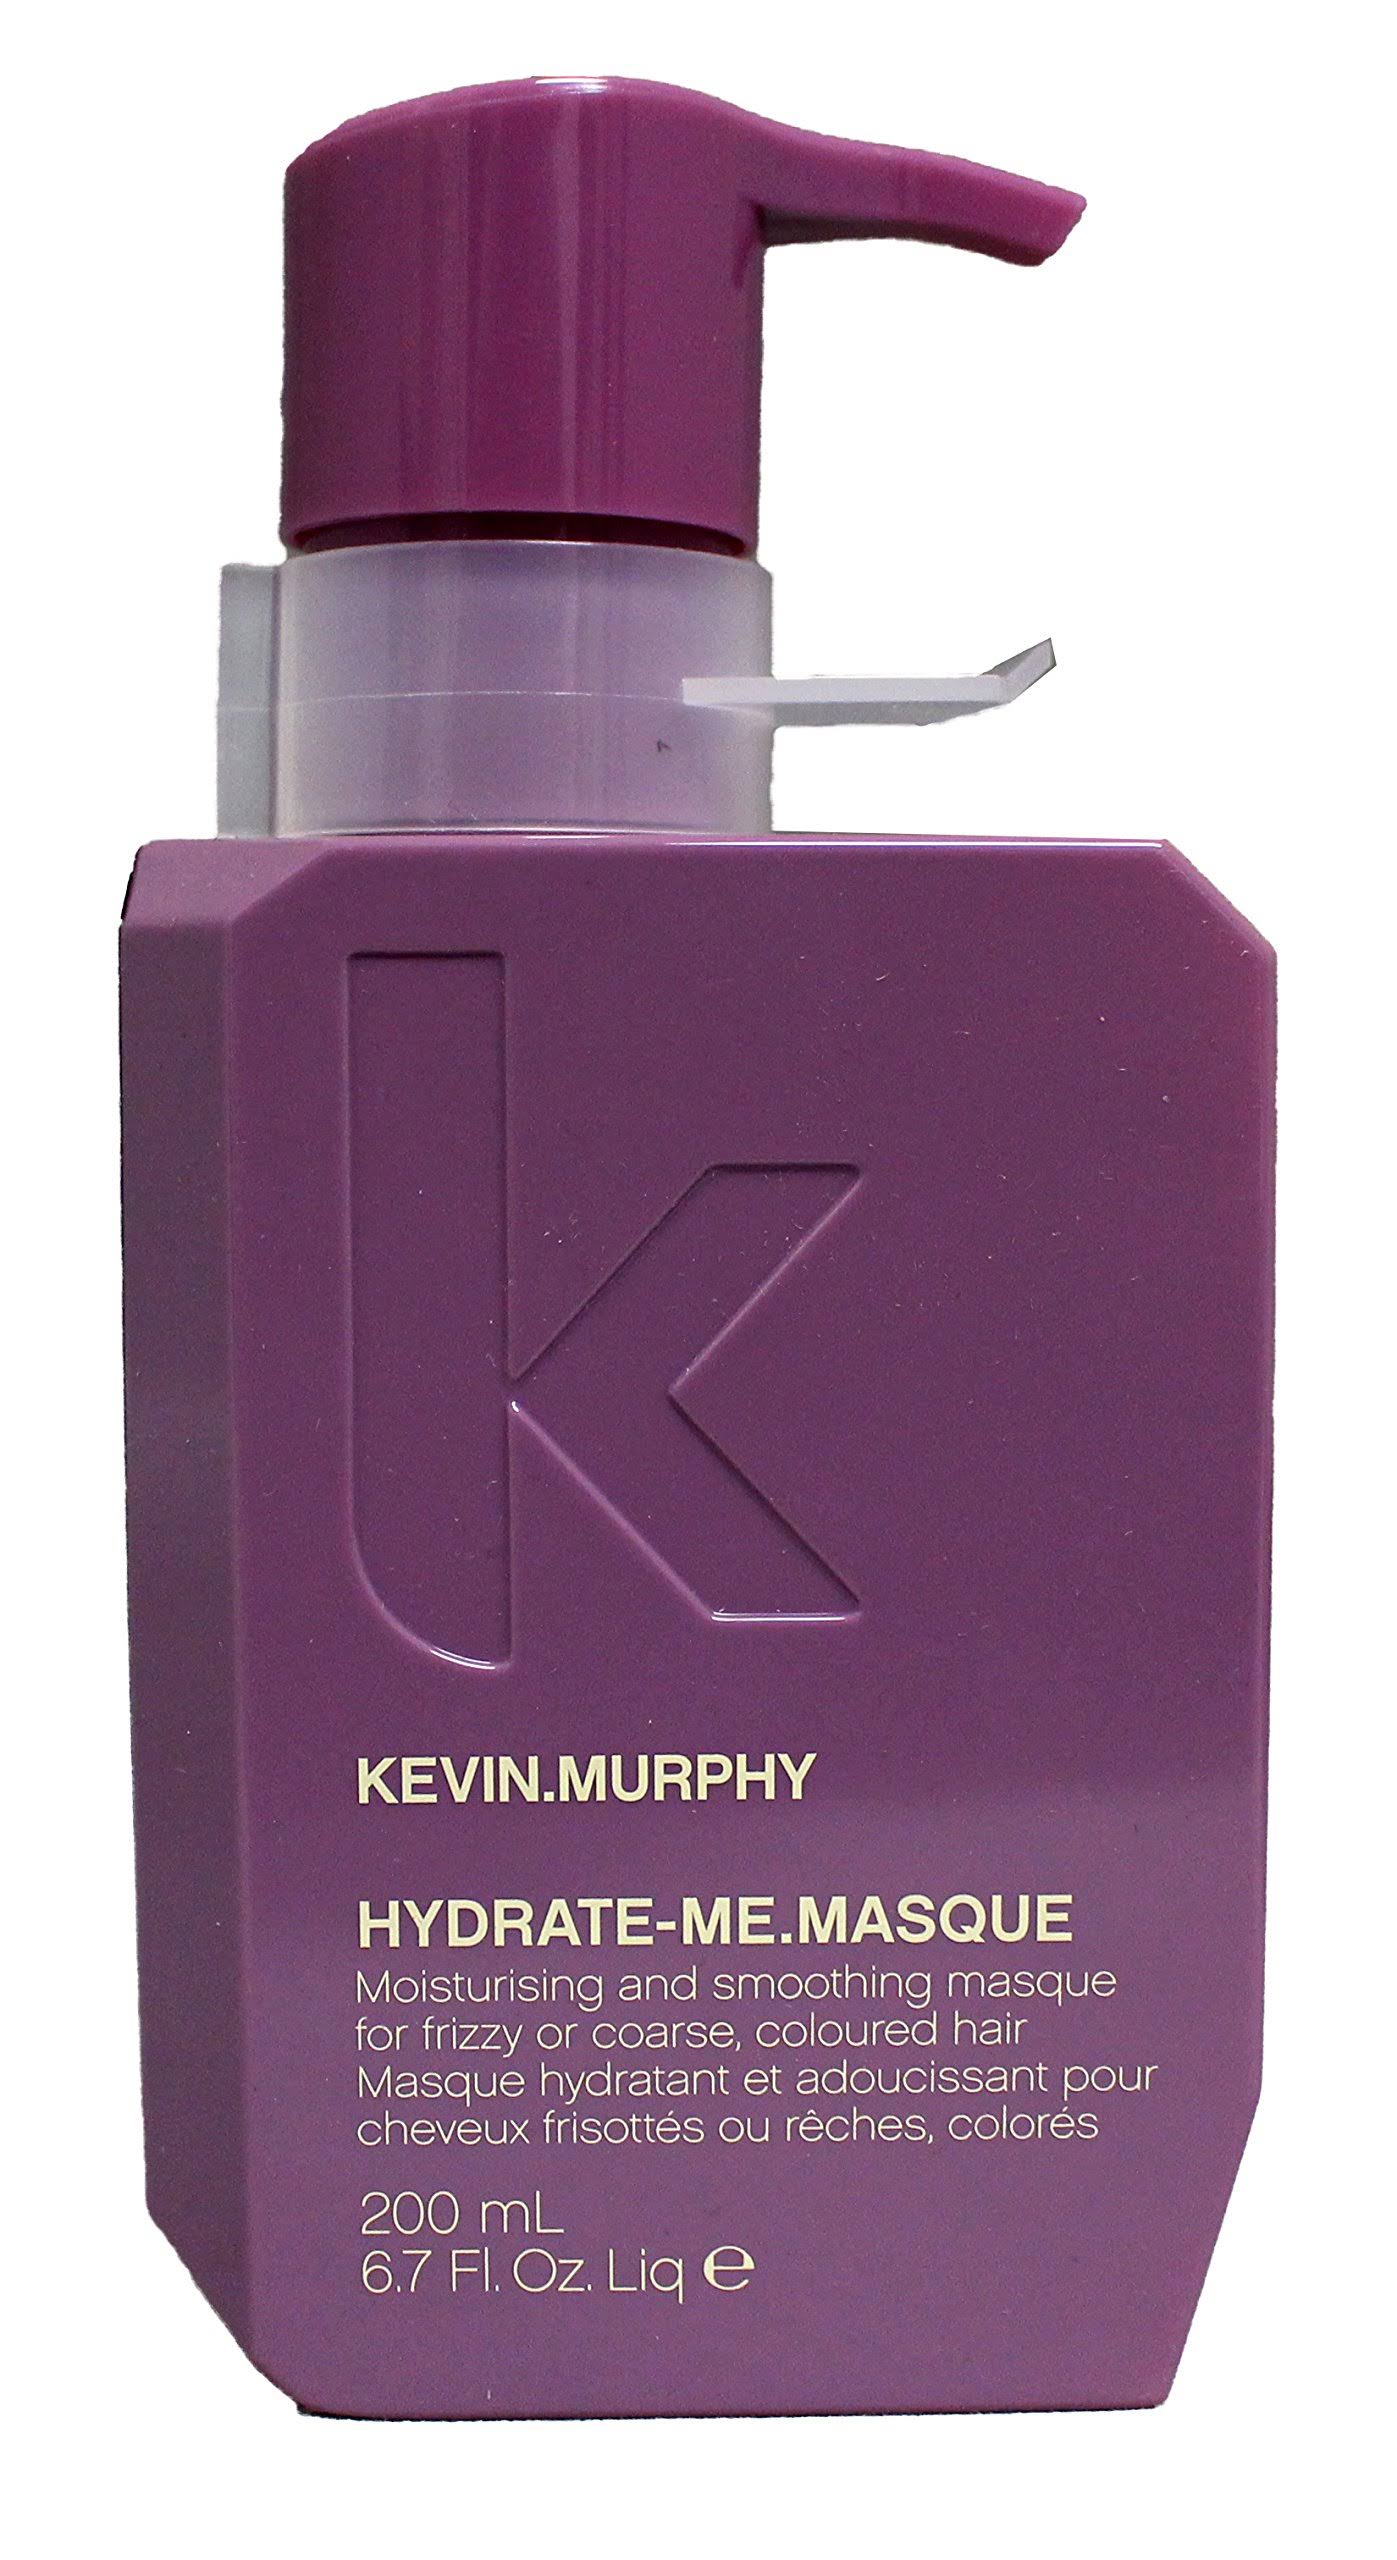 Kevin Murphy Hydrate-Me.Masque 200 ml